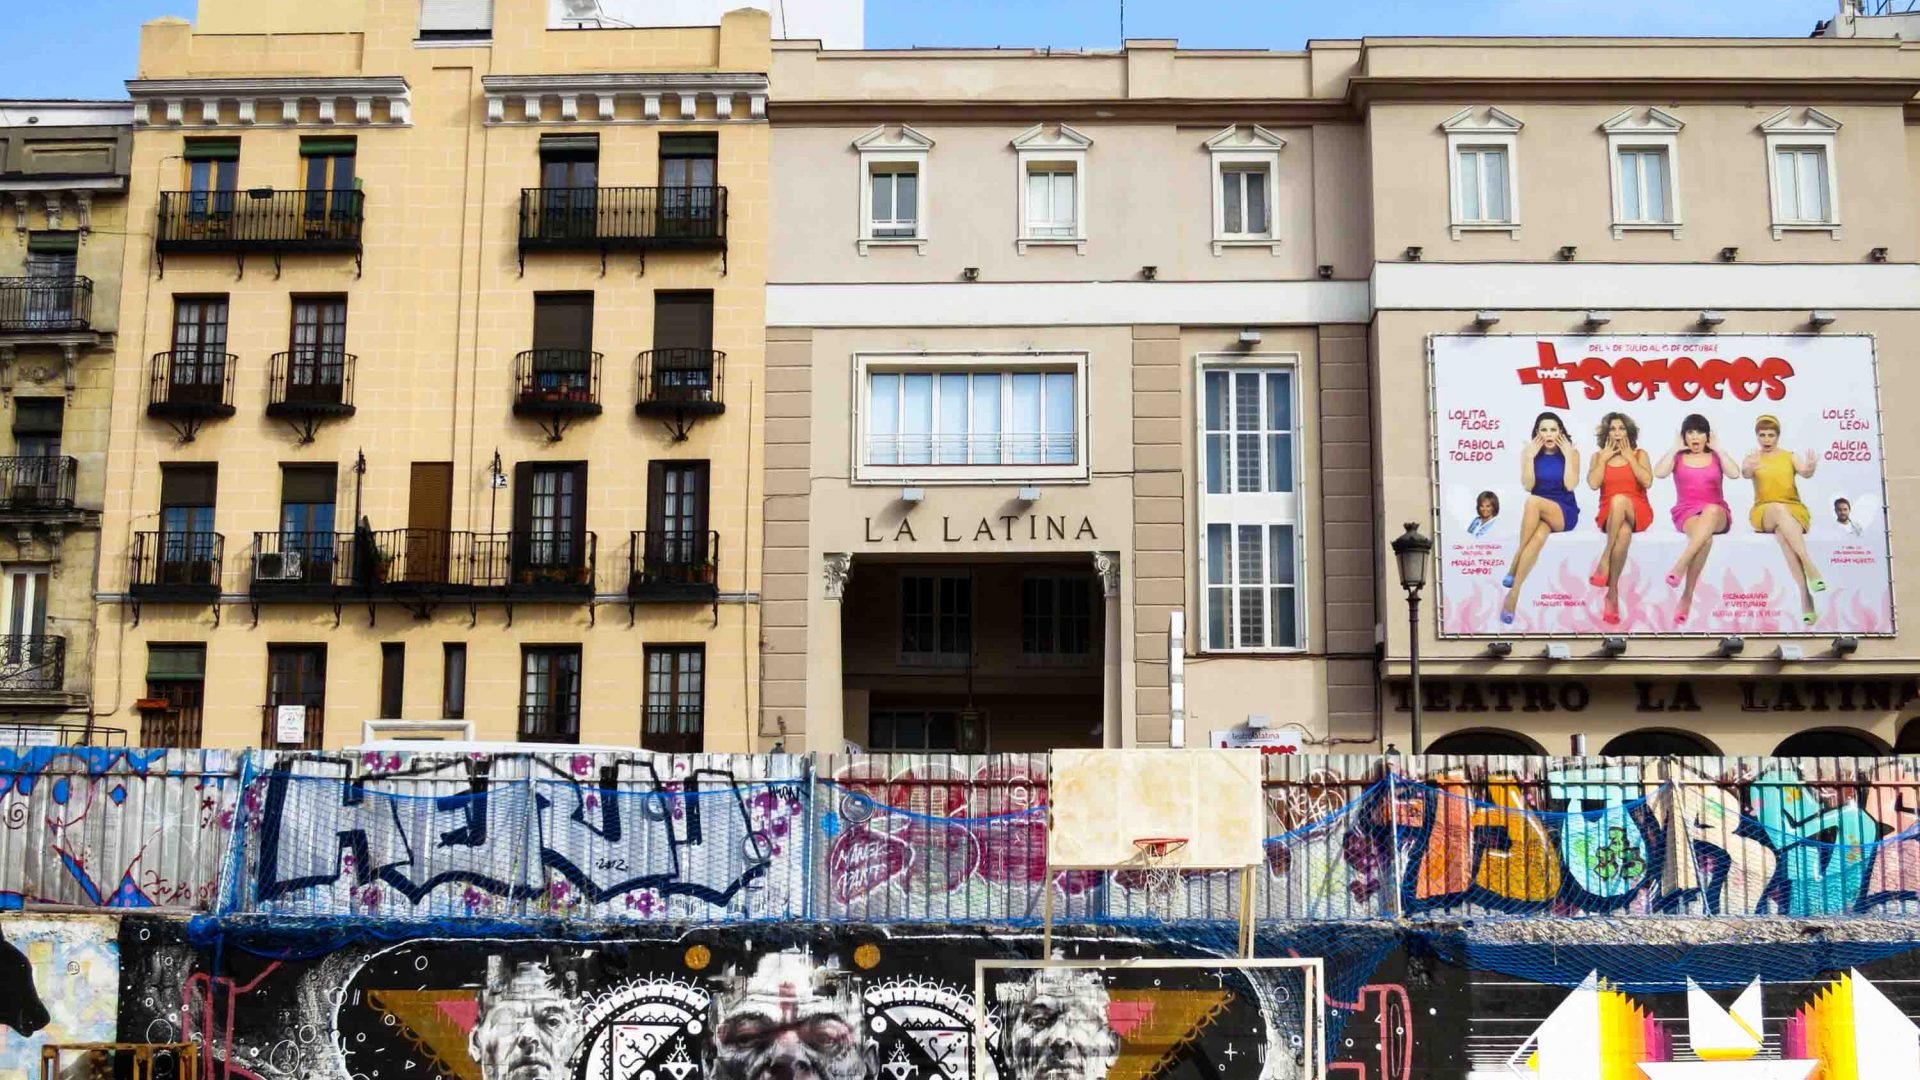 24 hours of love and loss in Madrid’s La Latina